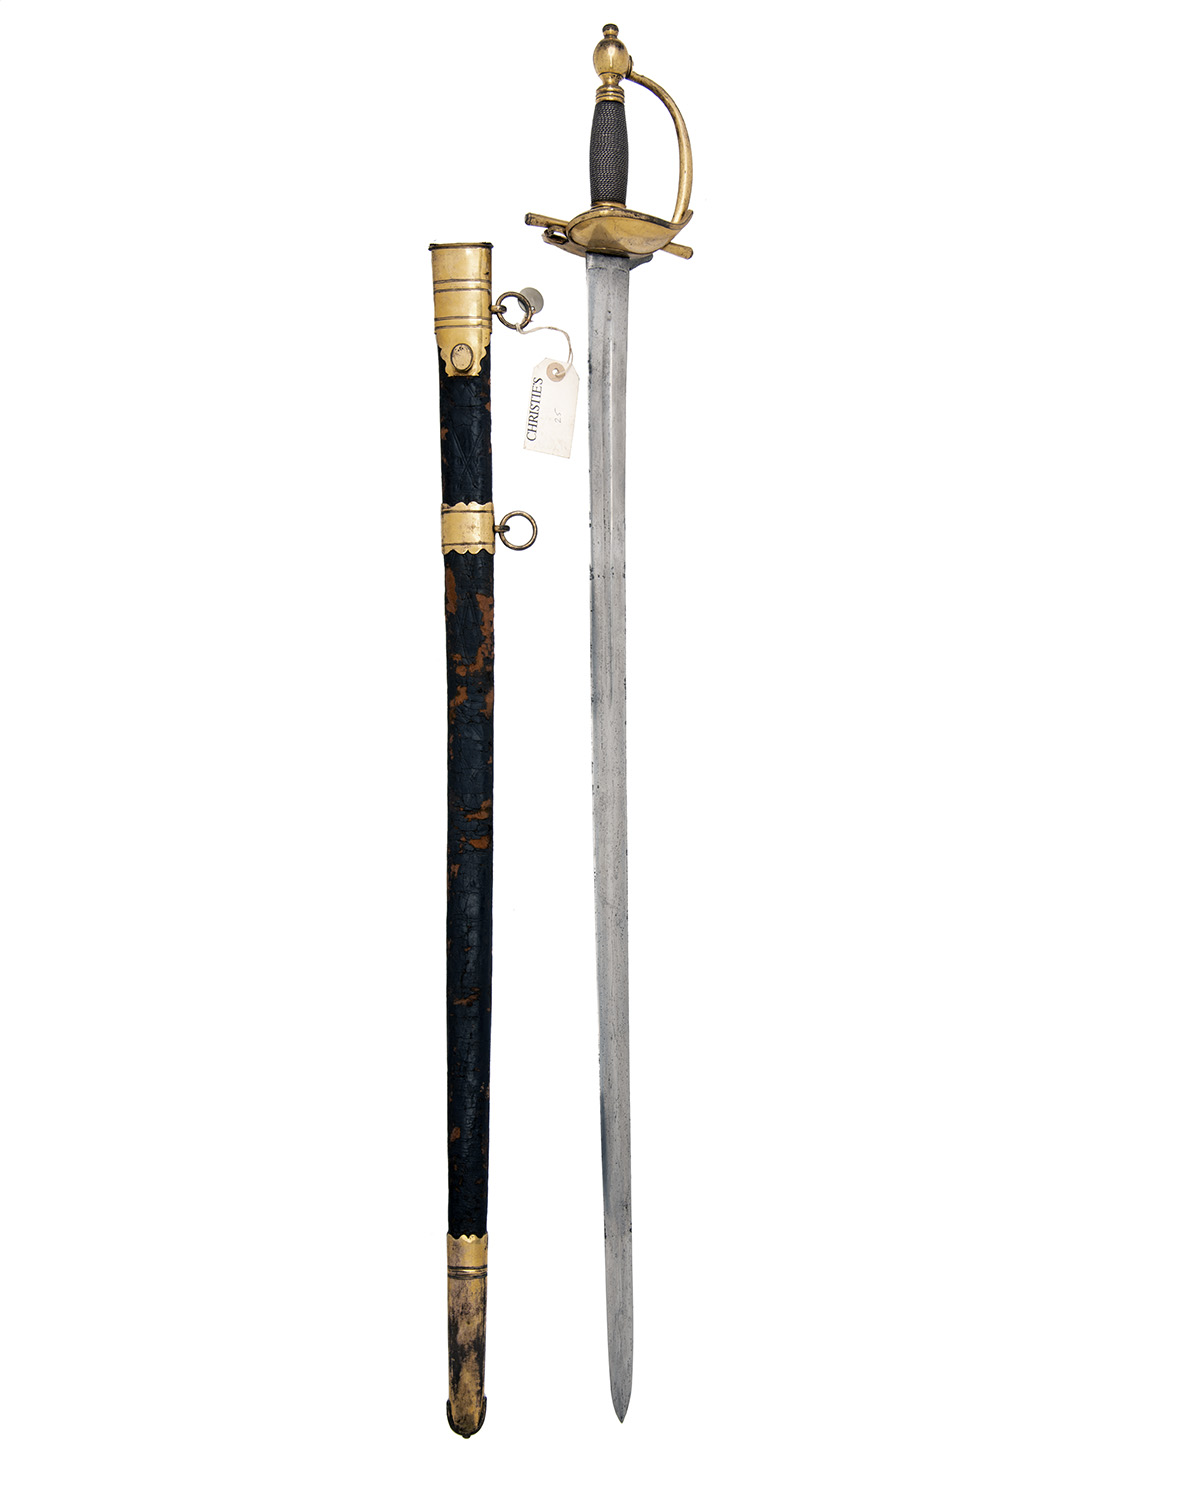 D. EGG, LONDON A GOOD 1796 PATTERN HEAVY CAVALRY OFFICER'S SWORD, with straight 34in. double-edged